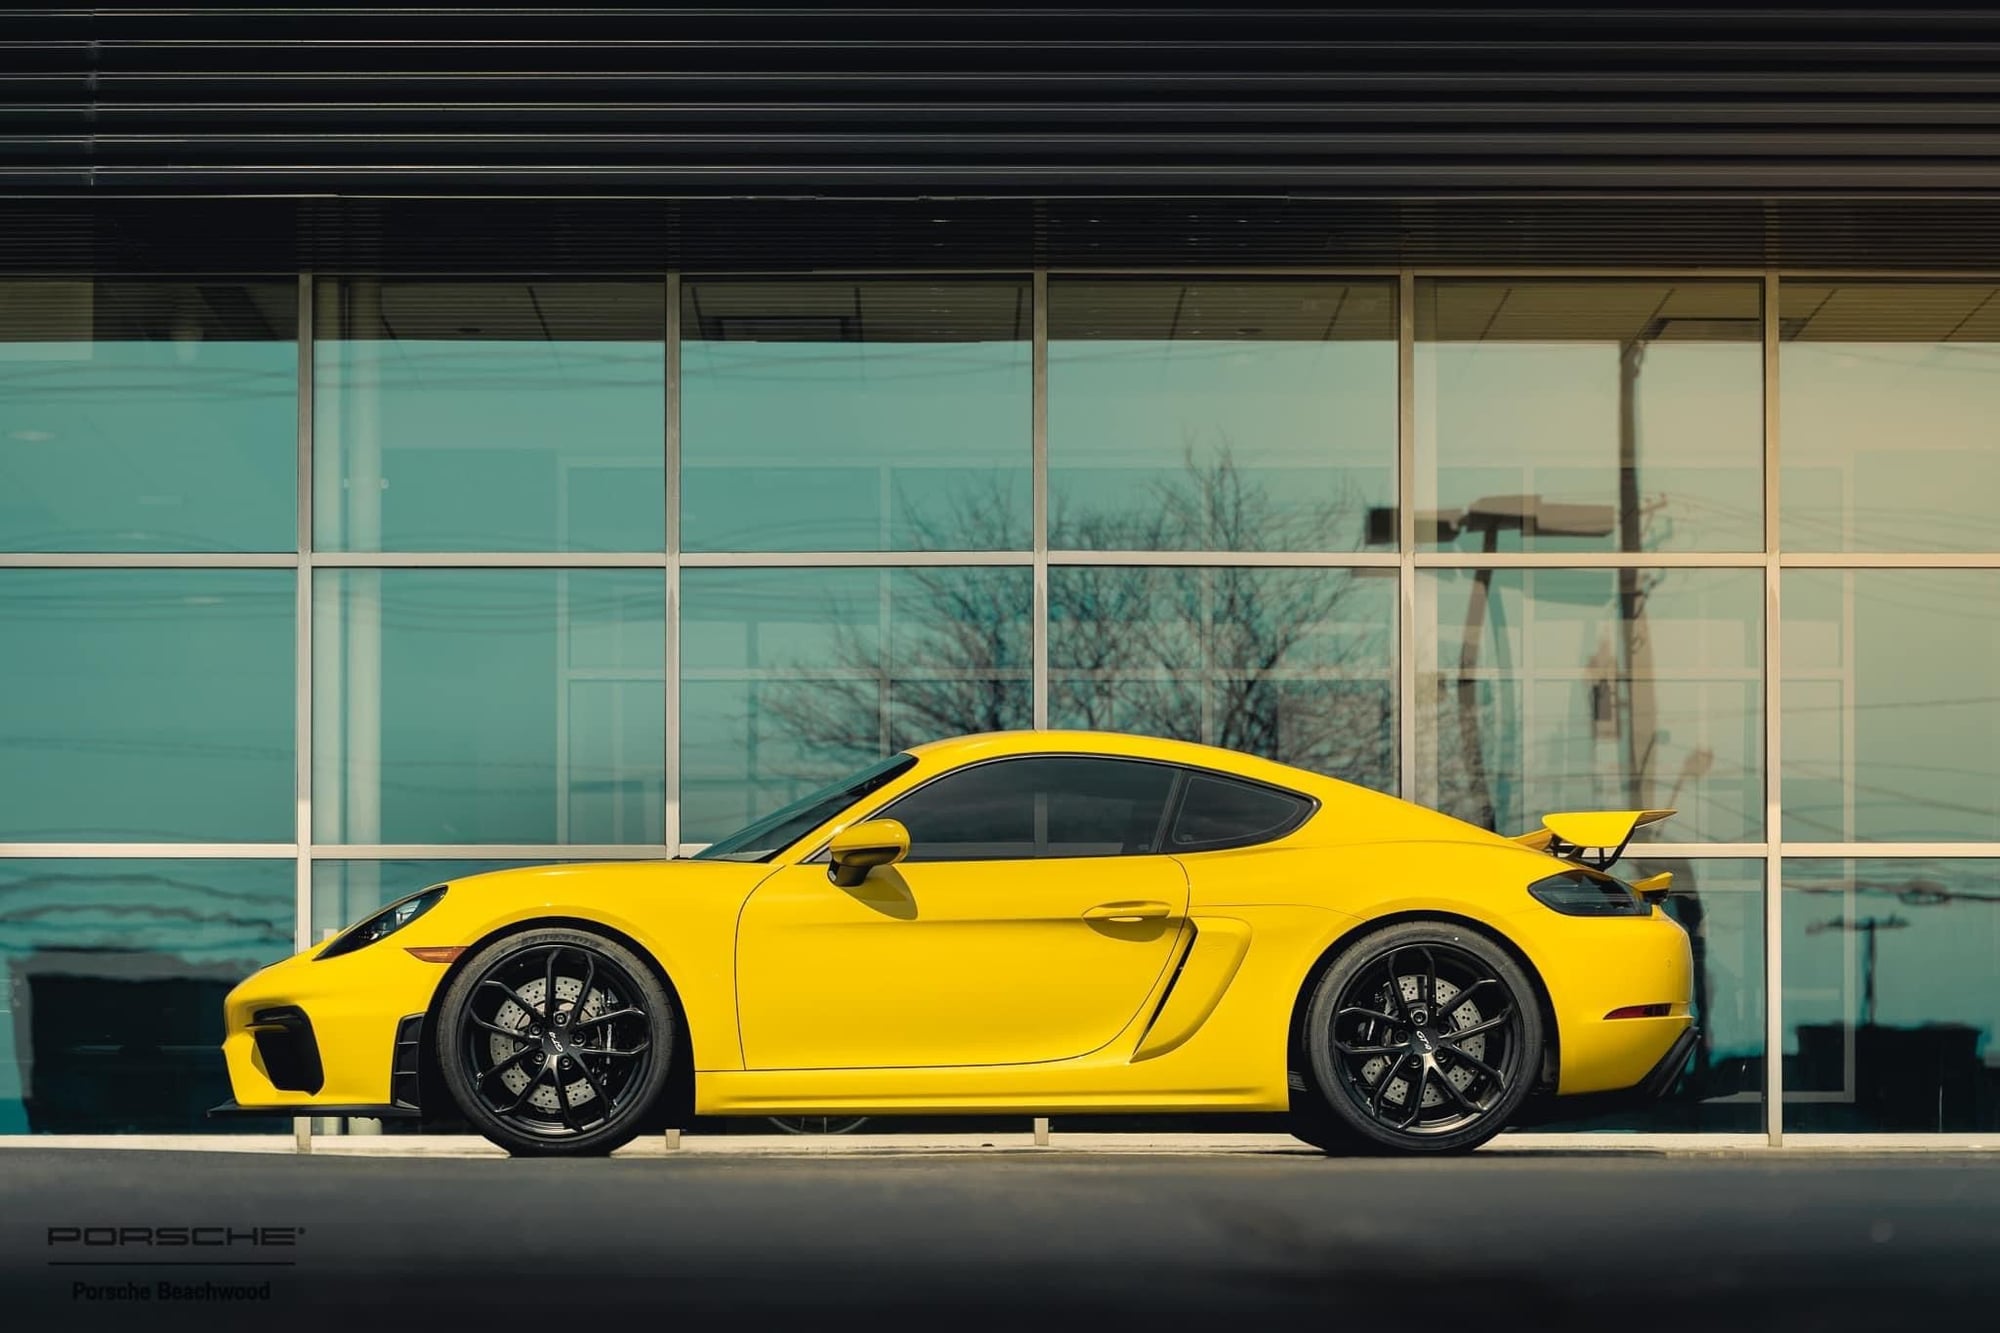 2021 Racing Yellow 718 GT4. 6MT. One Owner. Never tracked. - Rennlist ...